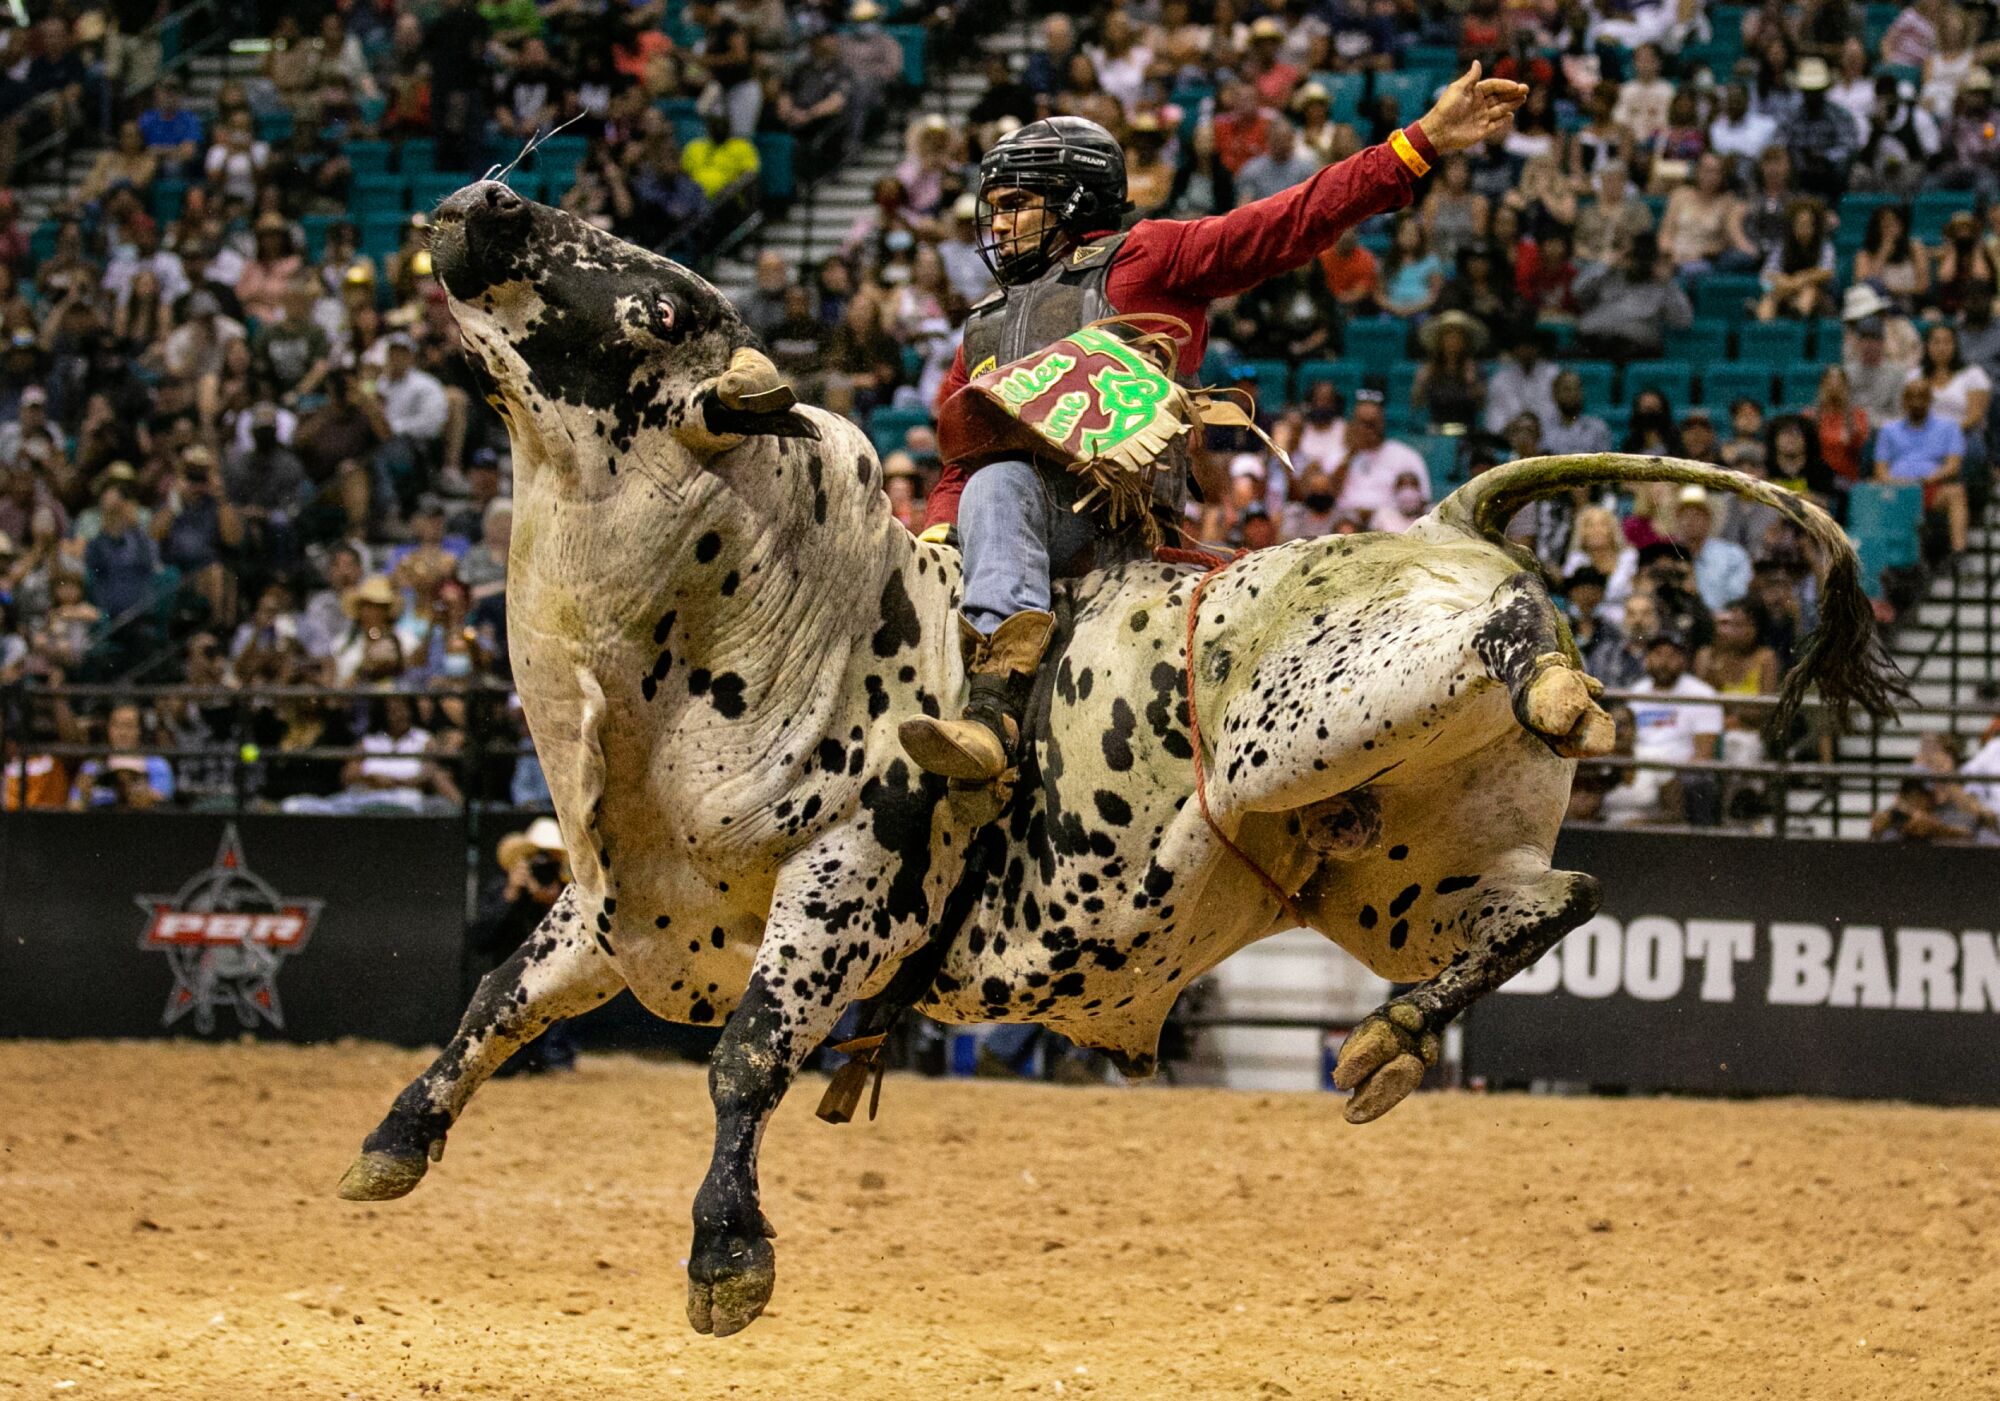 A man holding on with one hand as he rides a bucking bull before a rodeo crowd 